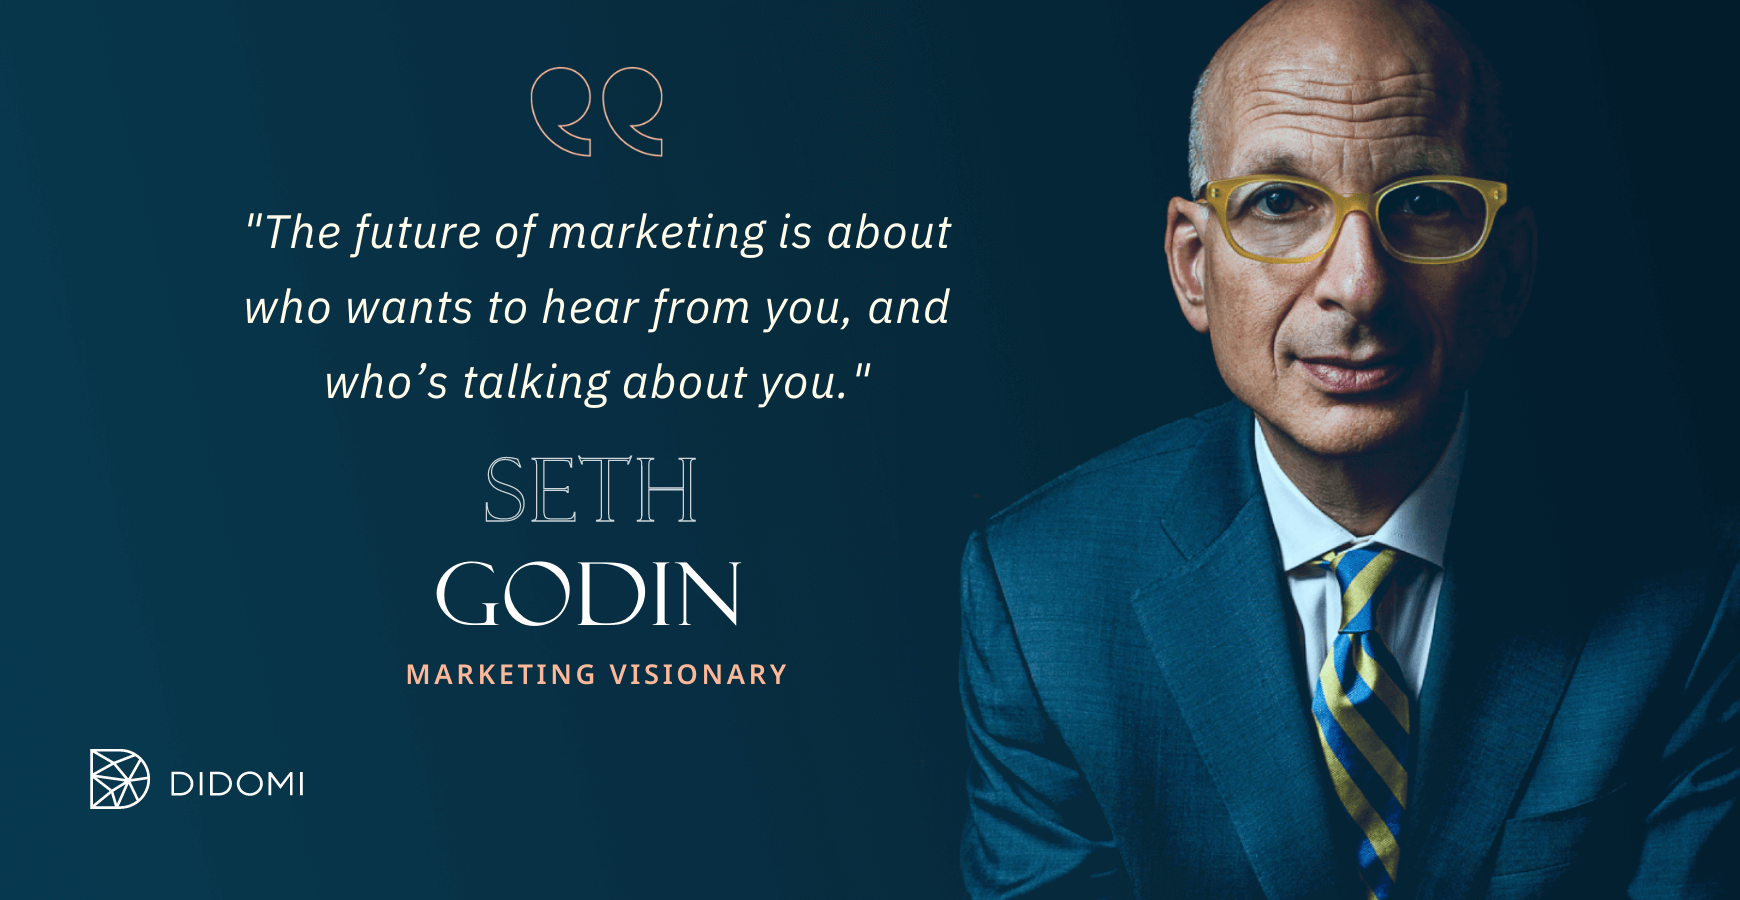 Marketing visionary Seth Godin on why trust is fundamental to the future of marketing